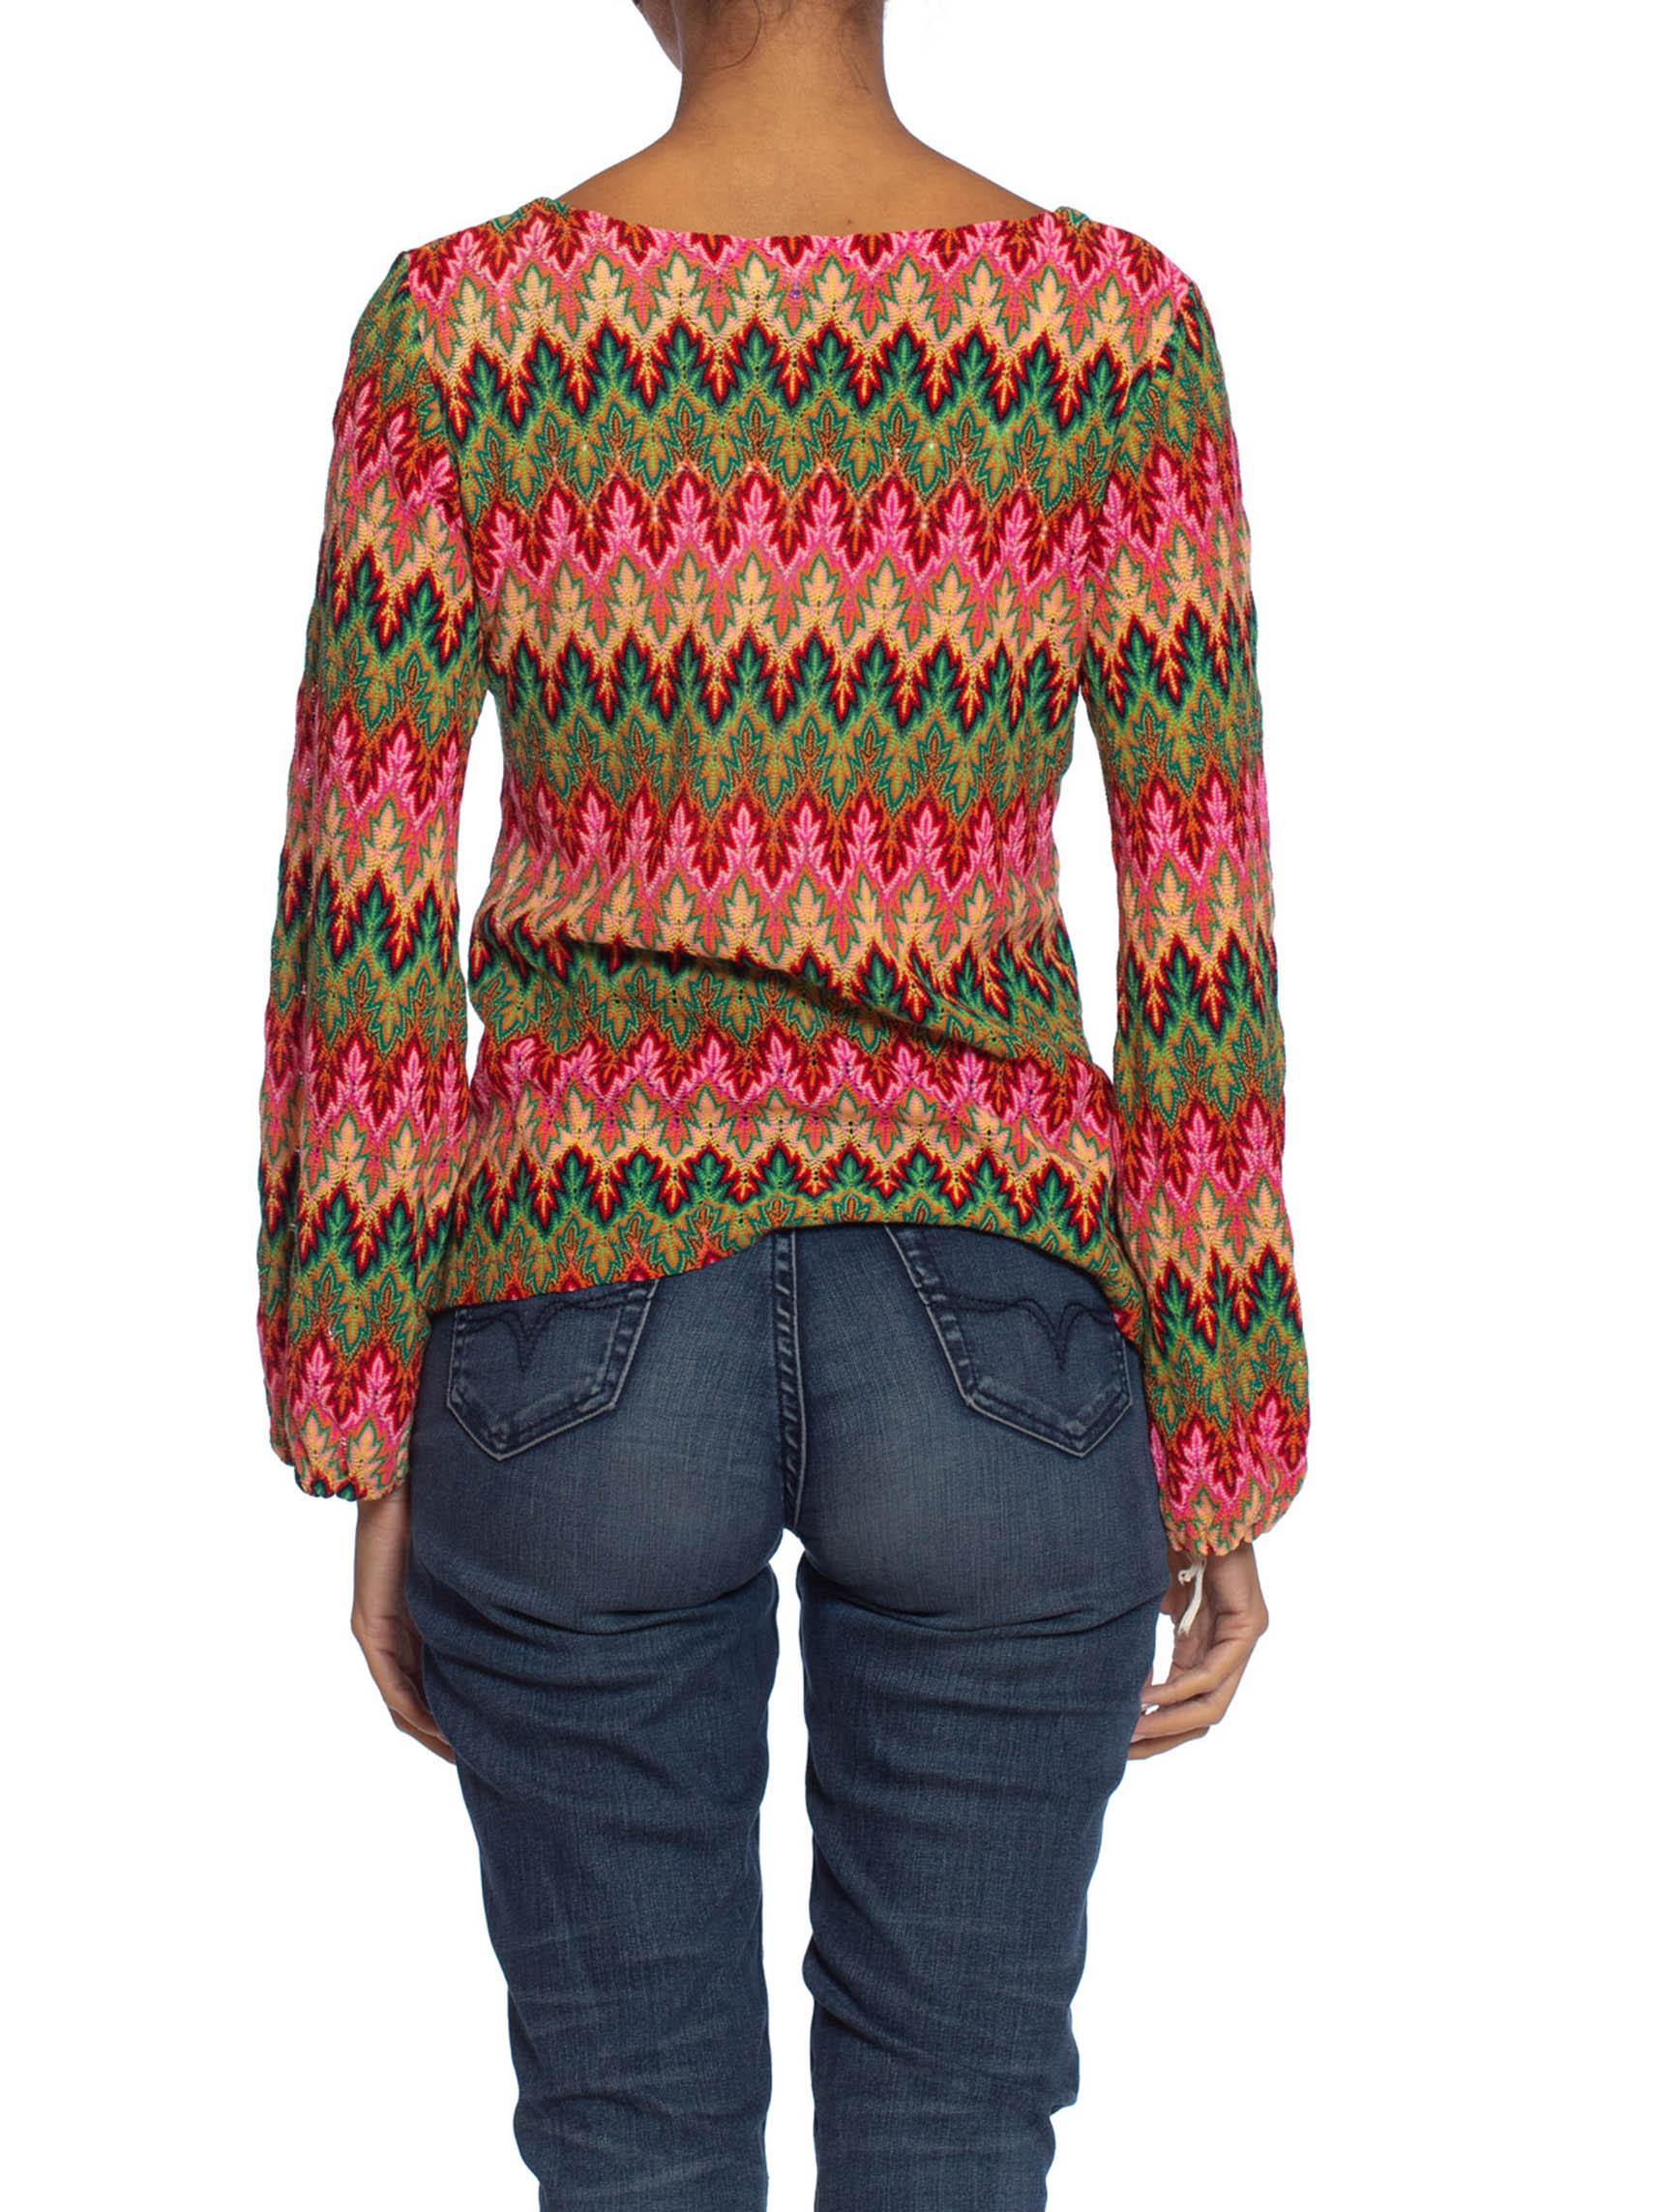 Brown 1970S MISSONI Style Pink & Green Acrylic Knit Boho Top Made In Japan